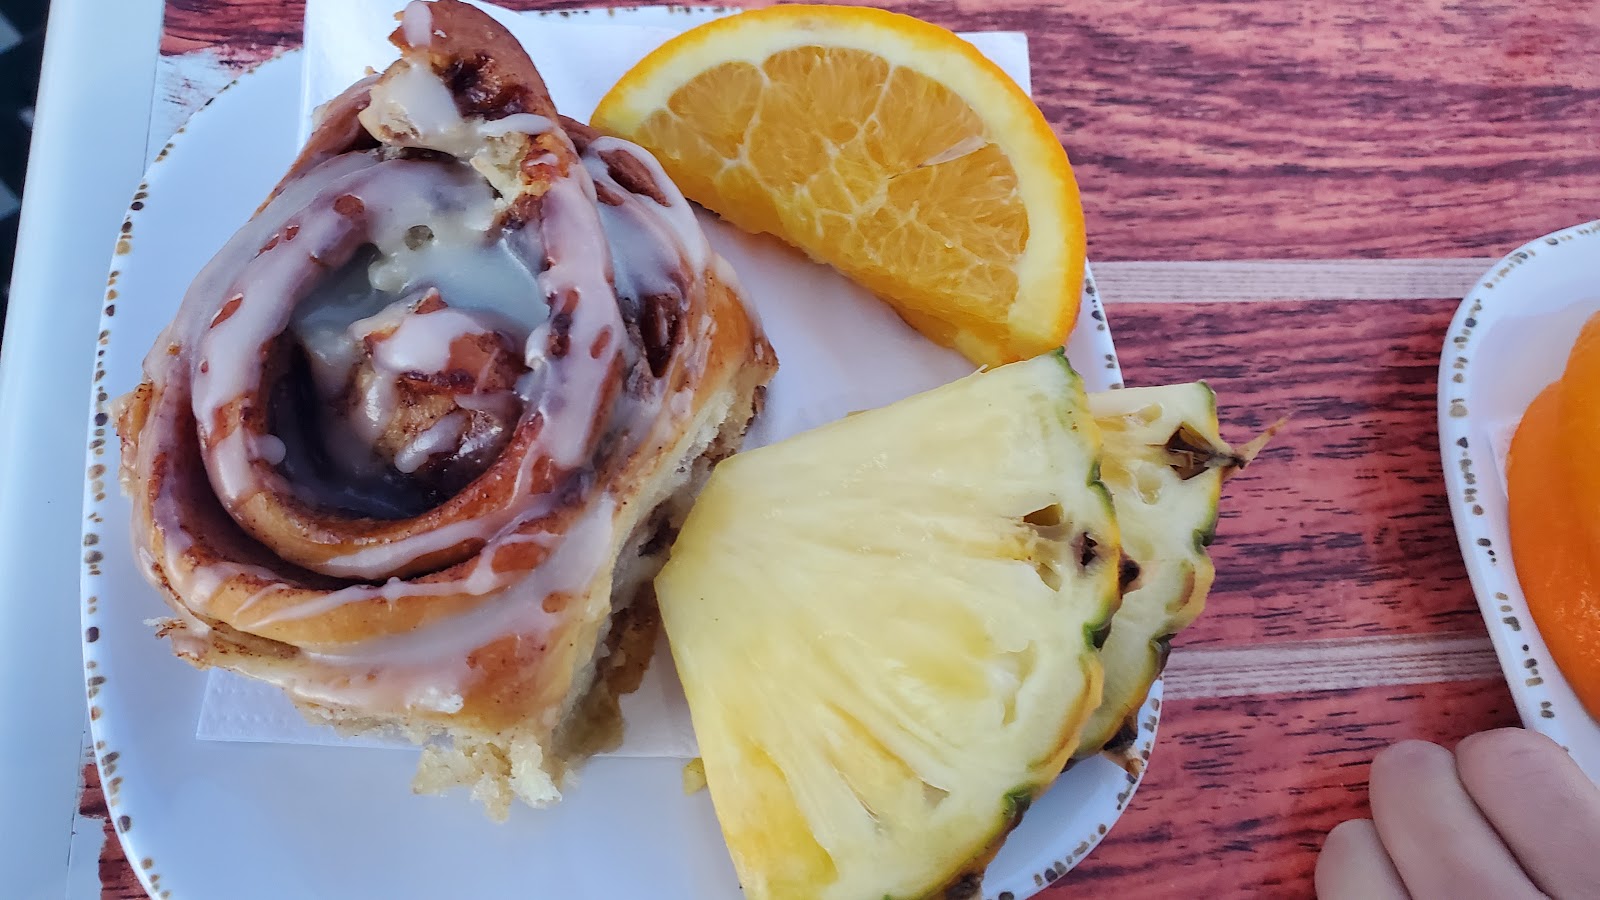 Image of a cinnamon roll, orange slices, and pineapple slices.